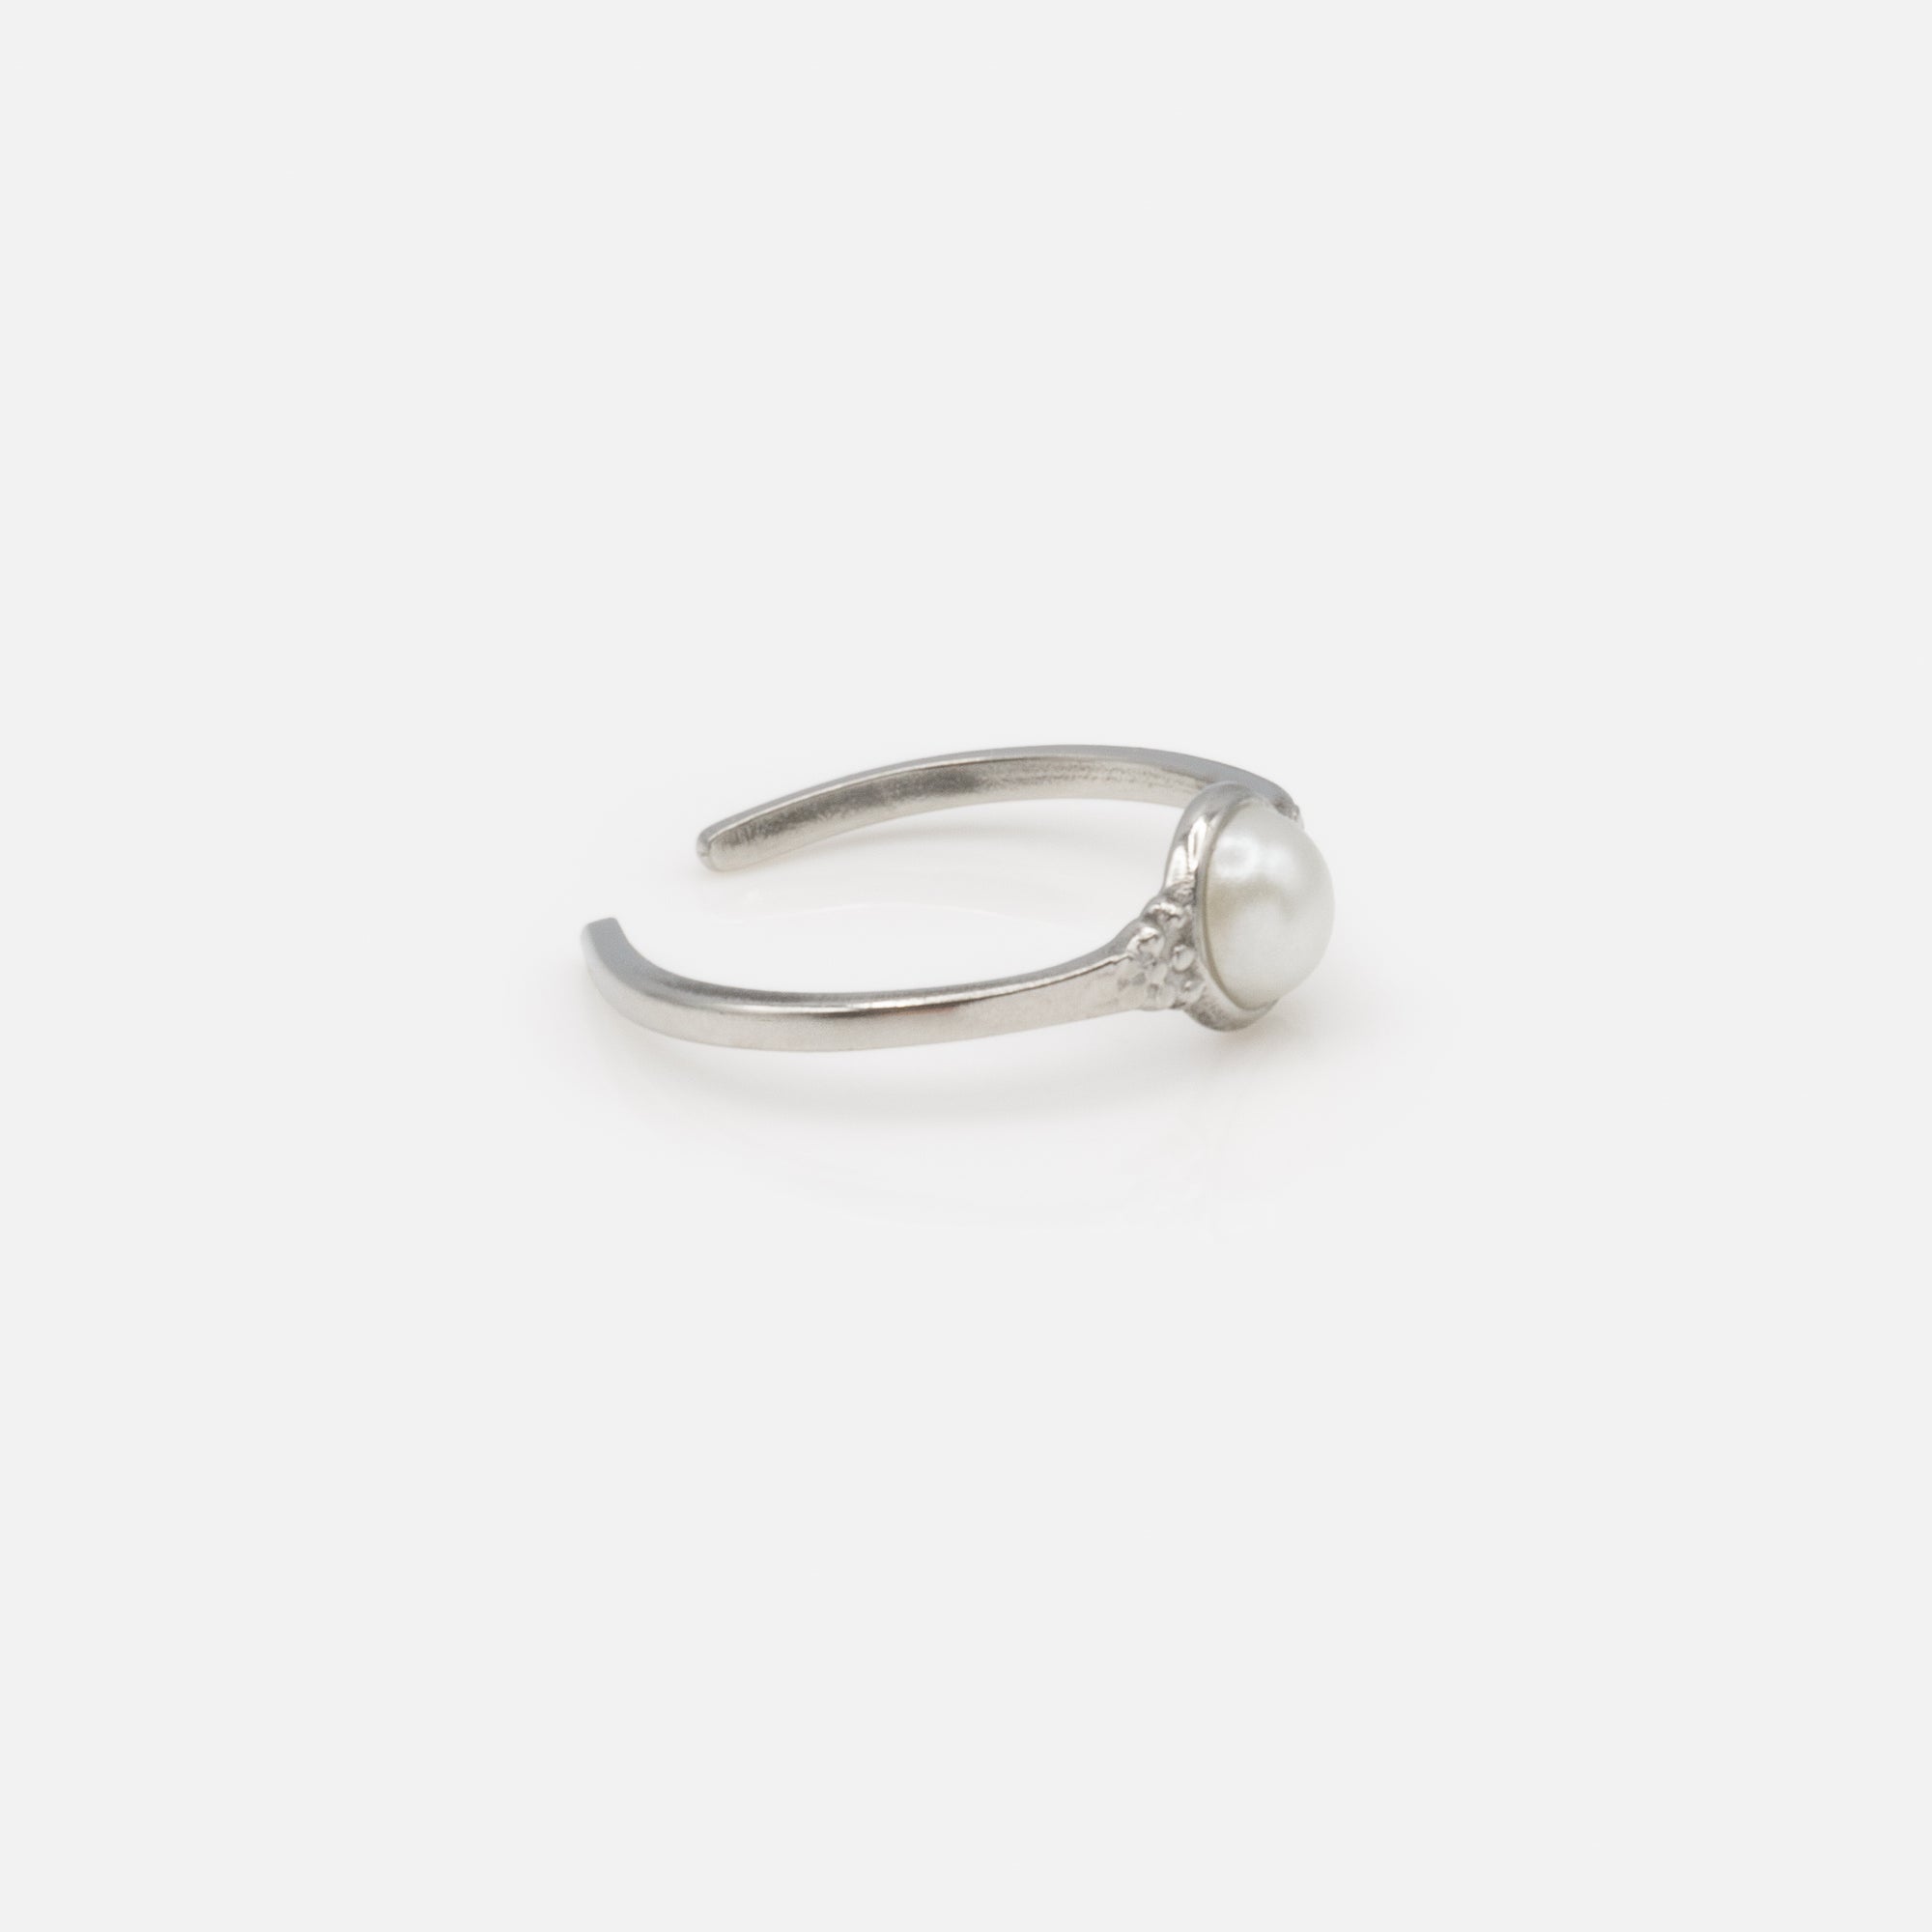 Silver open ring with stainless steel bead